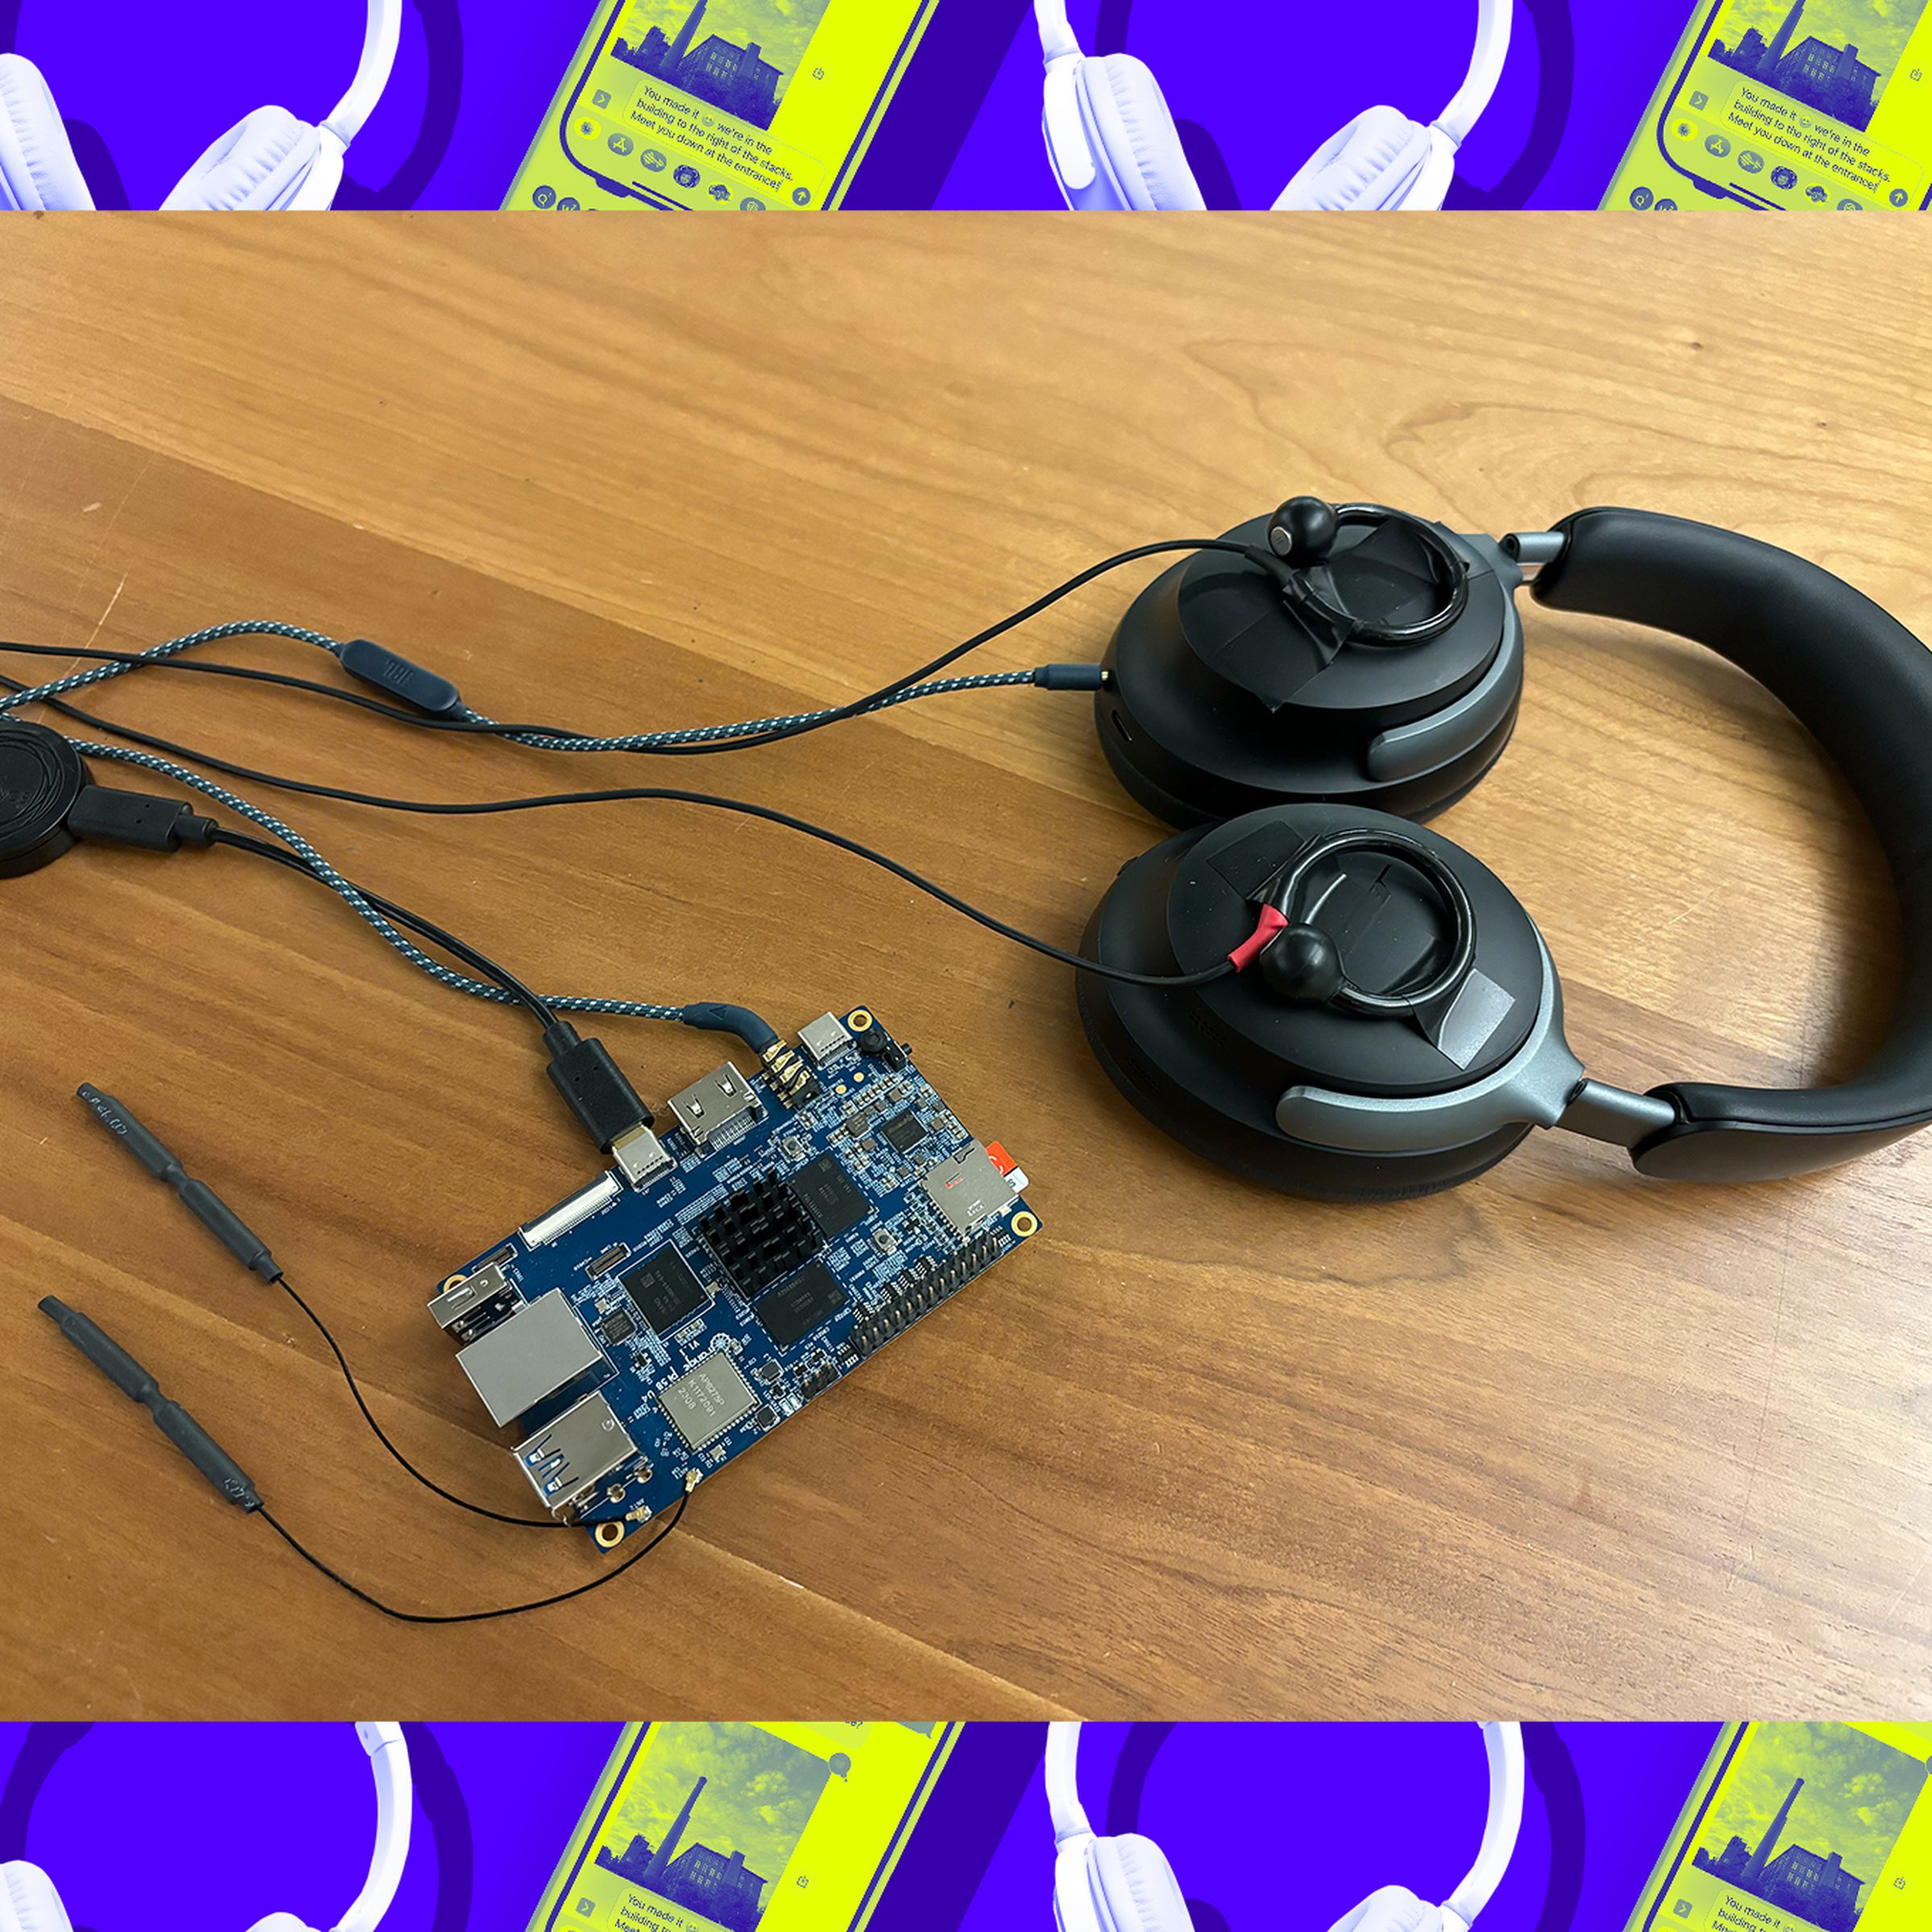 A photo of headphones with a motherboard, on top of a Vergecast illustration.